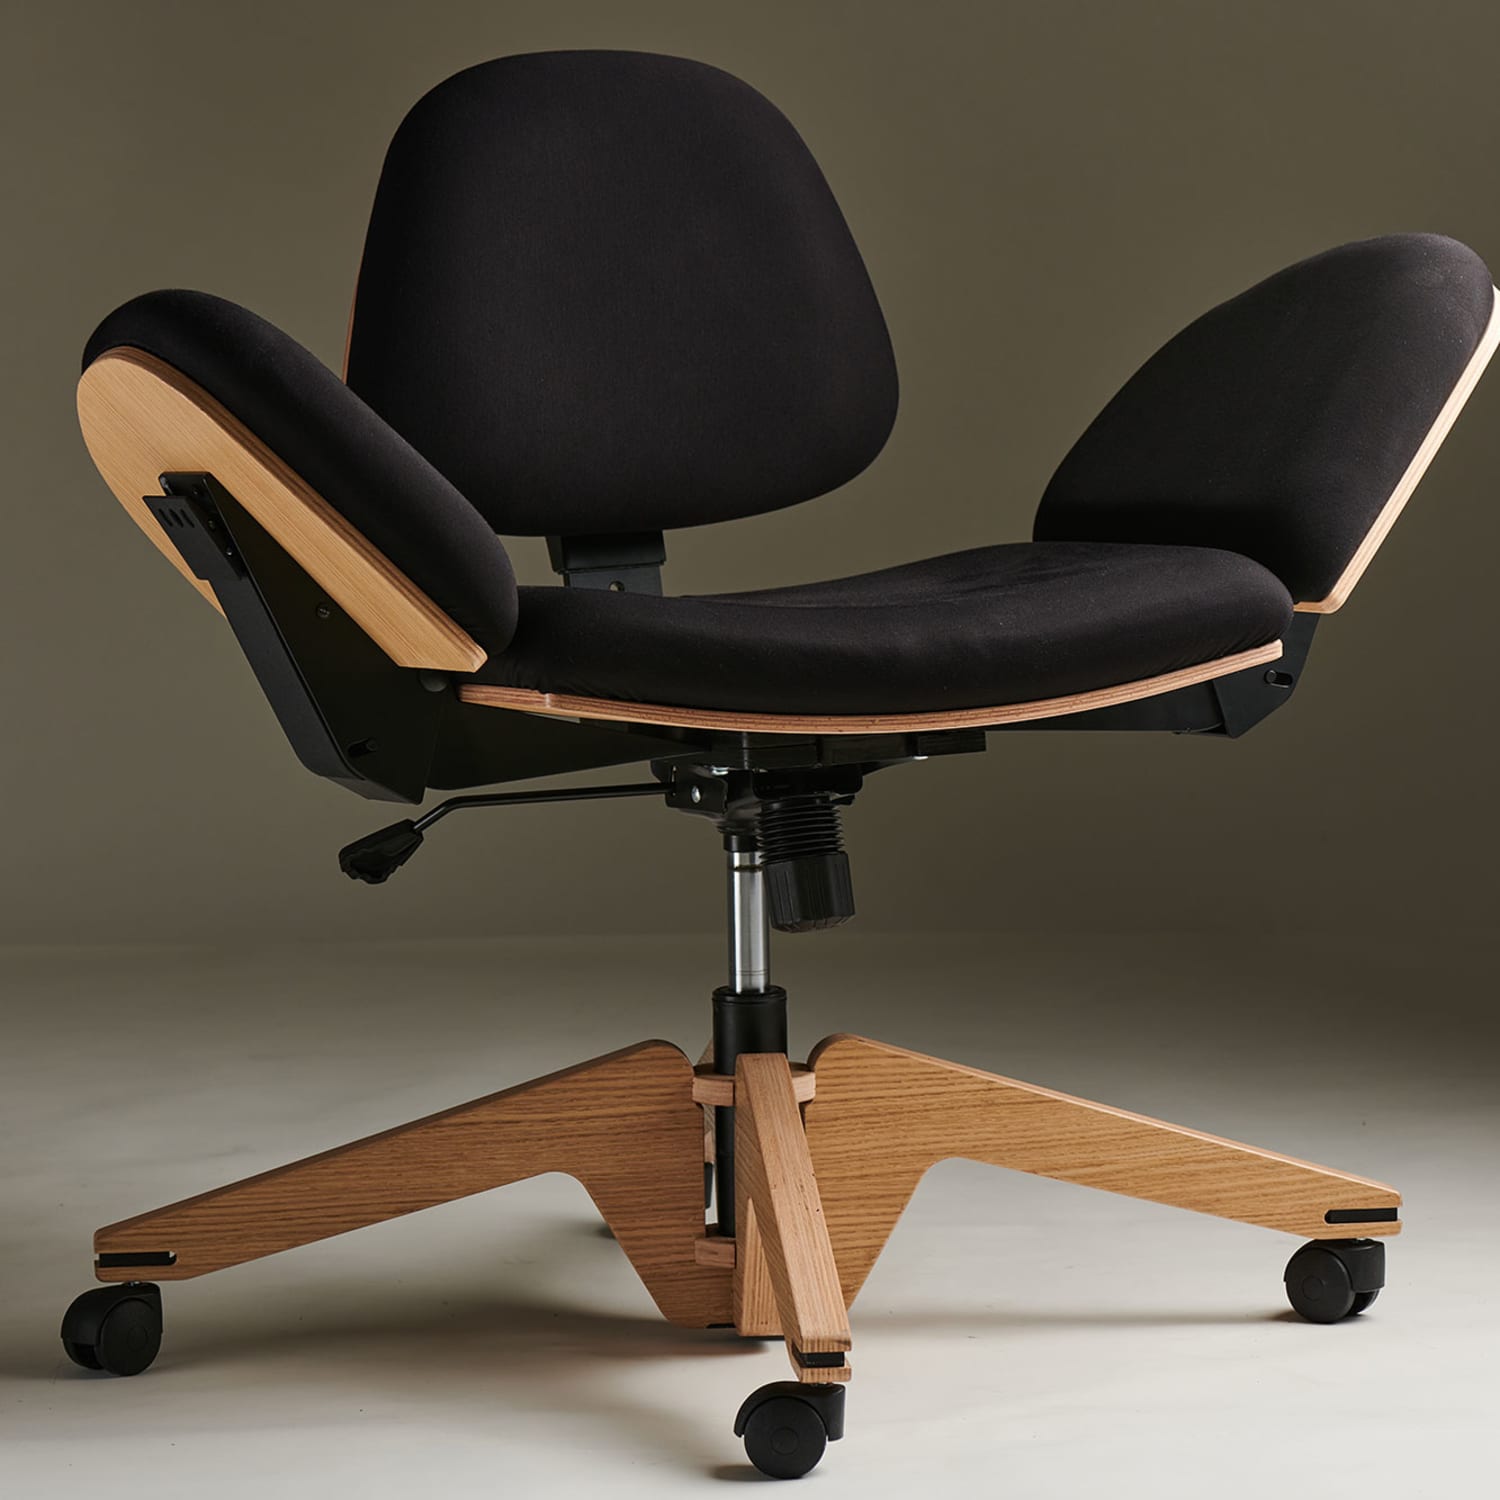 https://cdn.apartmenttherapy.info/image/upload/f_jpg,q_auto:eco,c_fill,g_auto,w_1500,ar_1:1/at%2Fnews-culture%2F2020-10%2FBeYou-Transforming-Chair-MediaKit-ChairOnly-_4